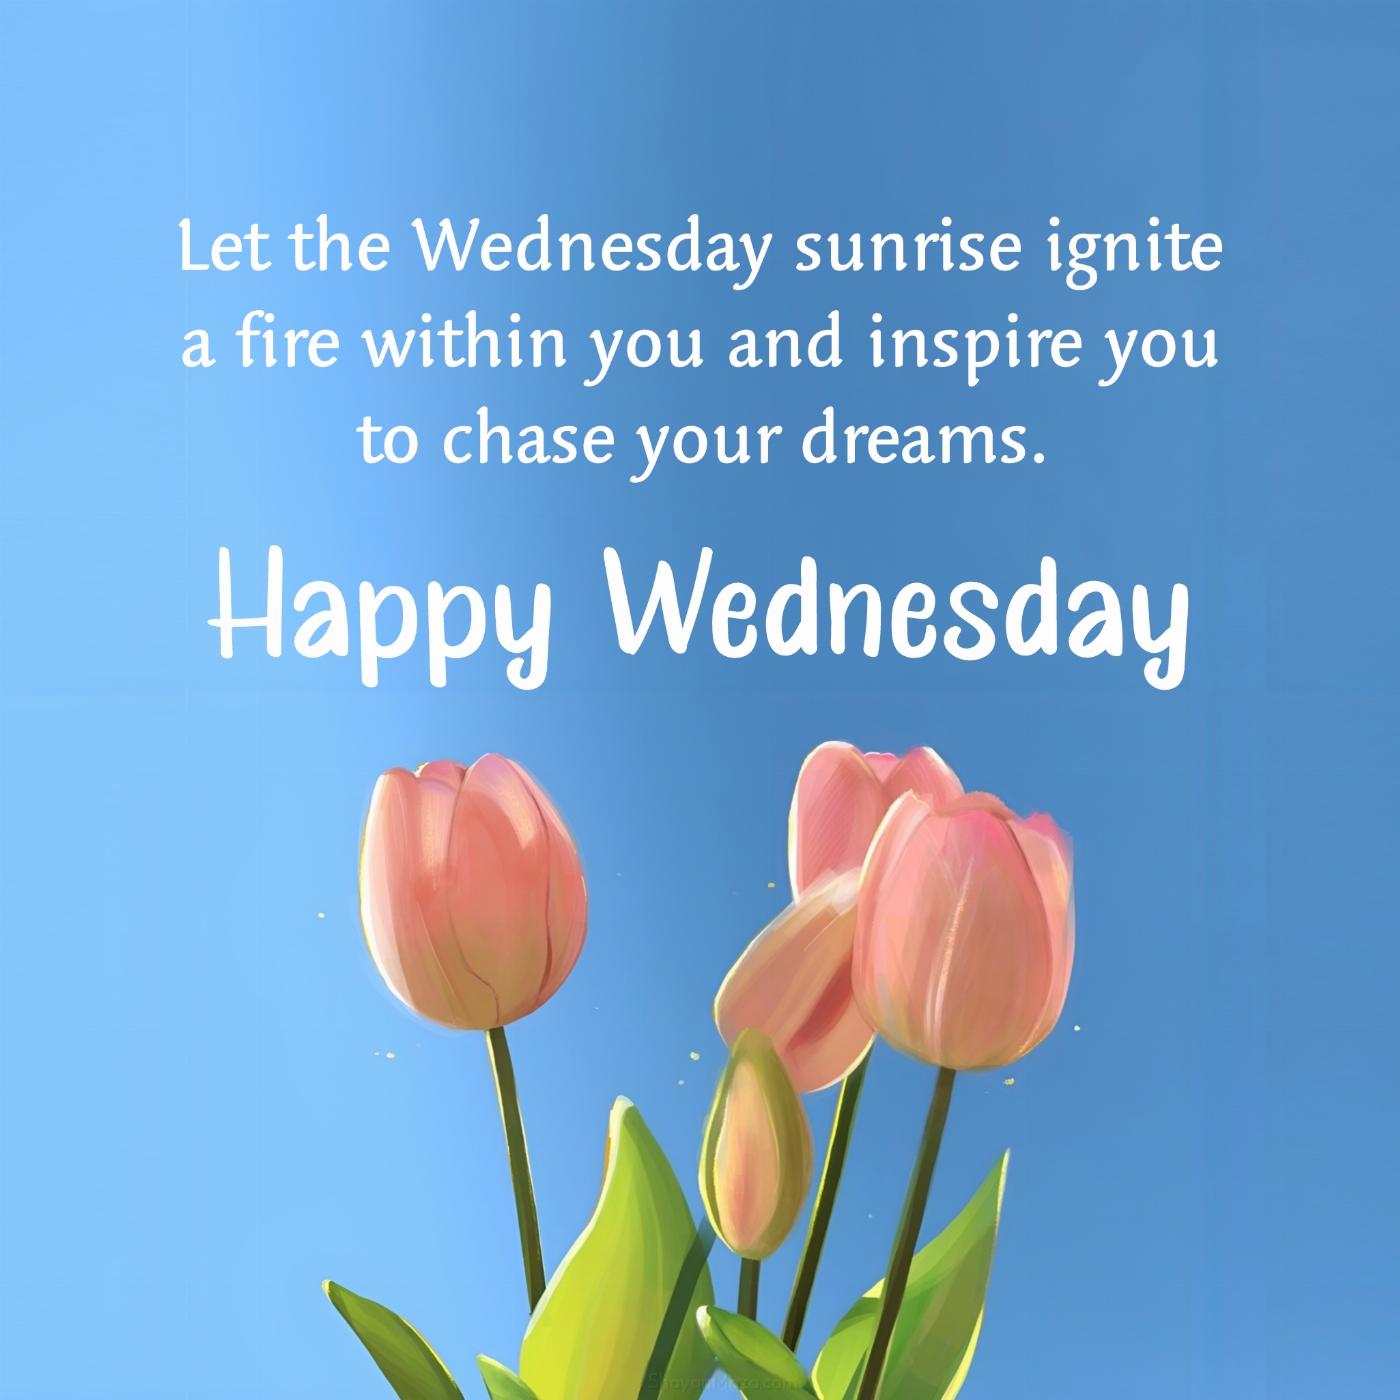 Let the Wednesday sunrise ignite a fire within you and inspire you